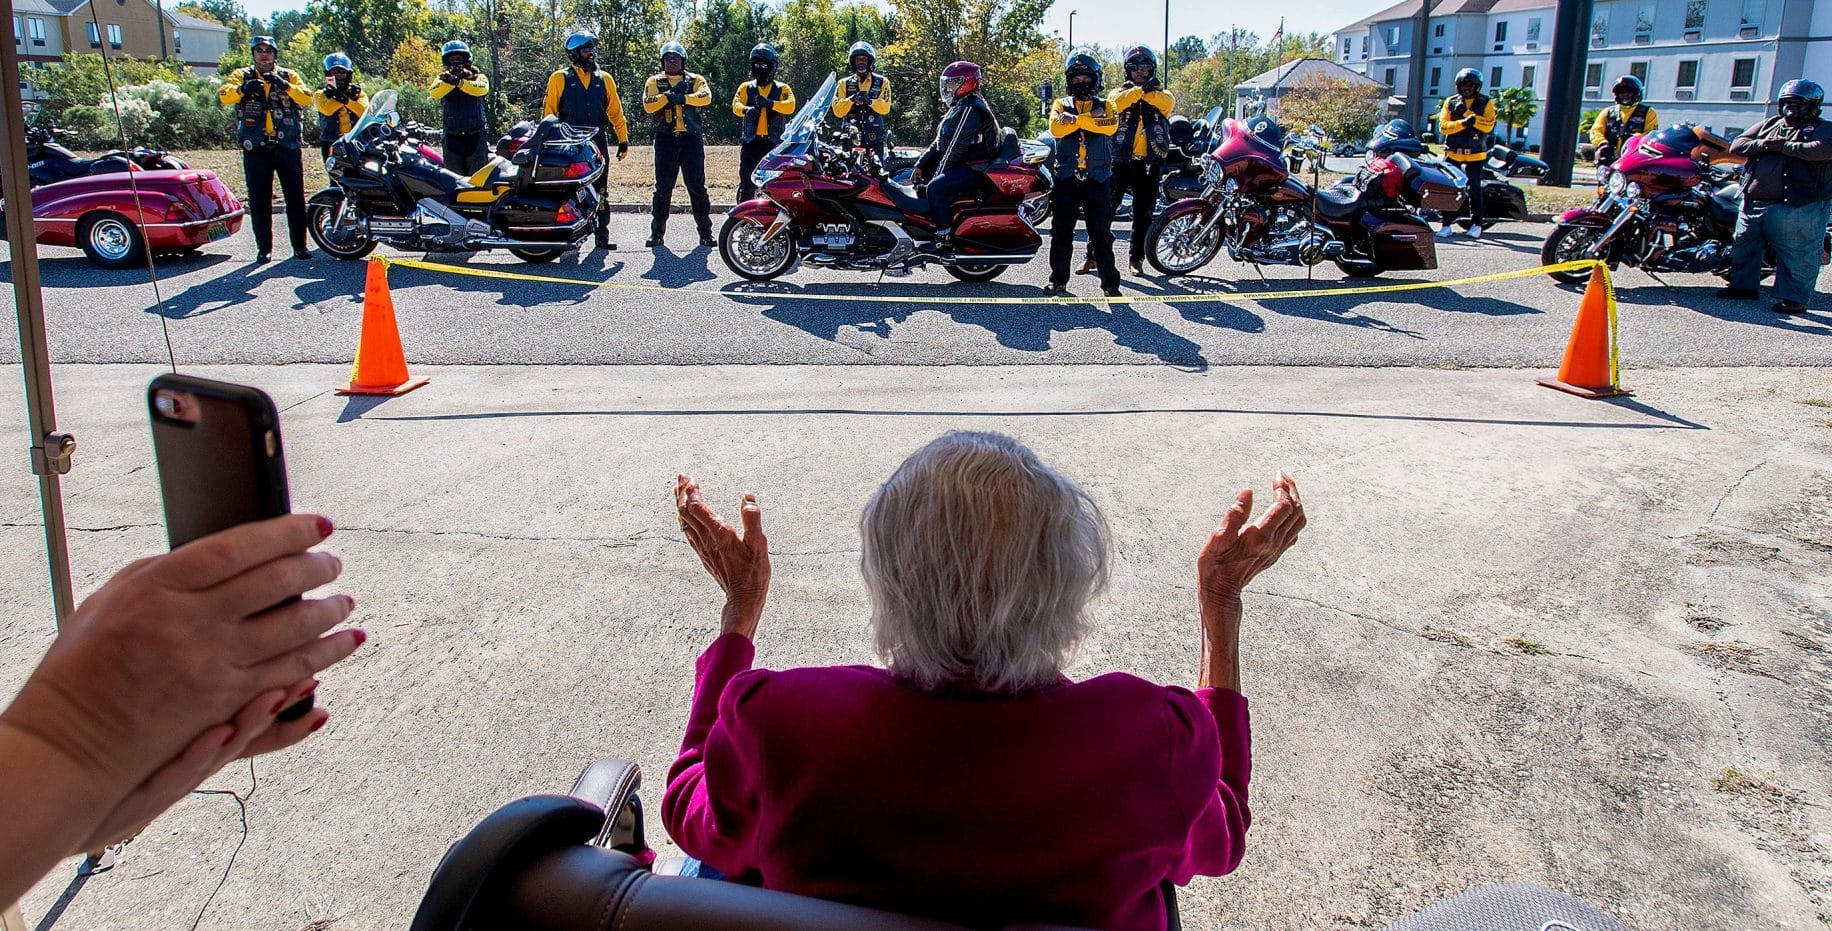 Pics: World's largest Black motorcycle club honors legacy of Buffalo